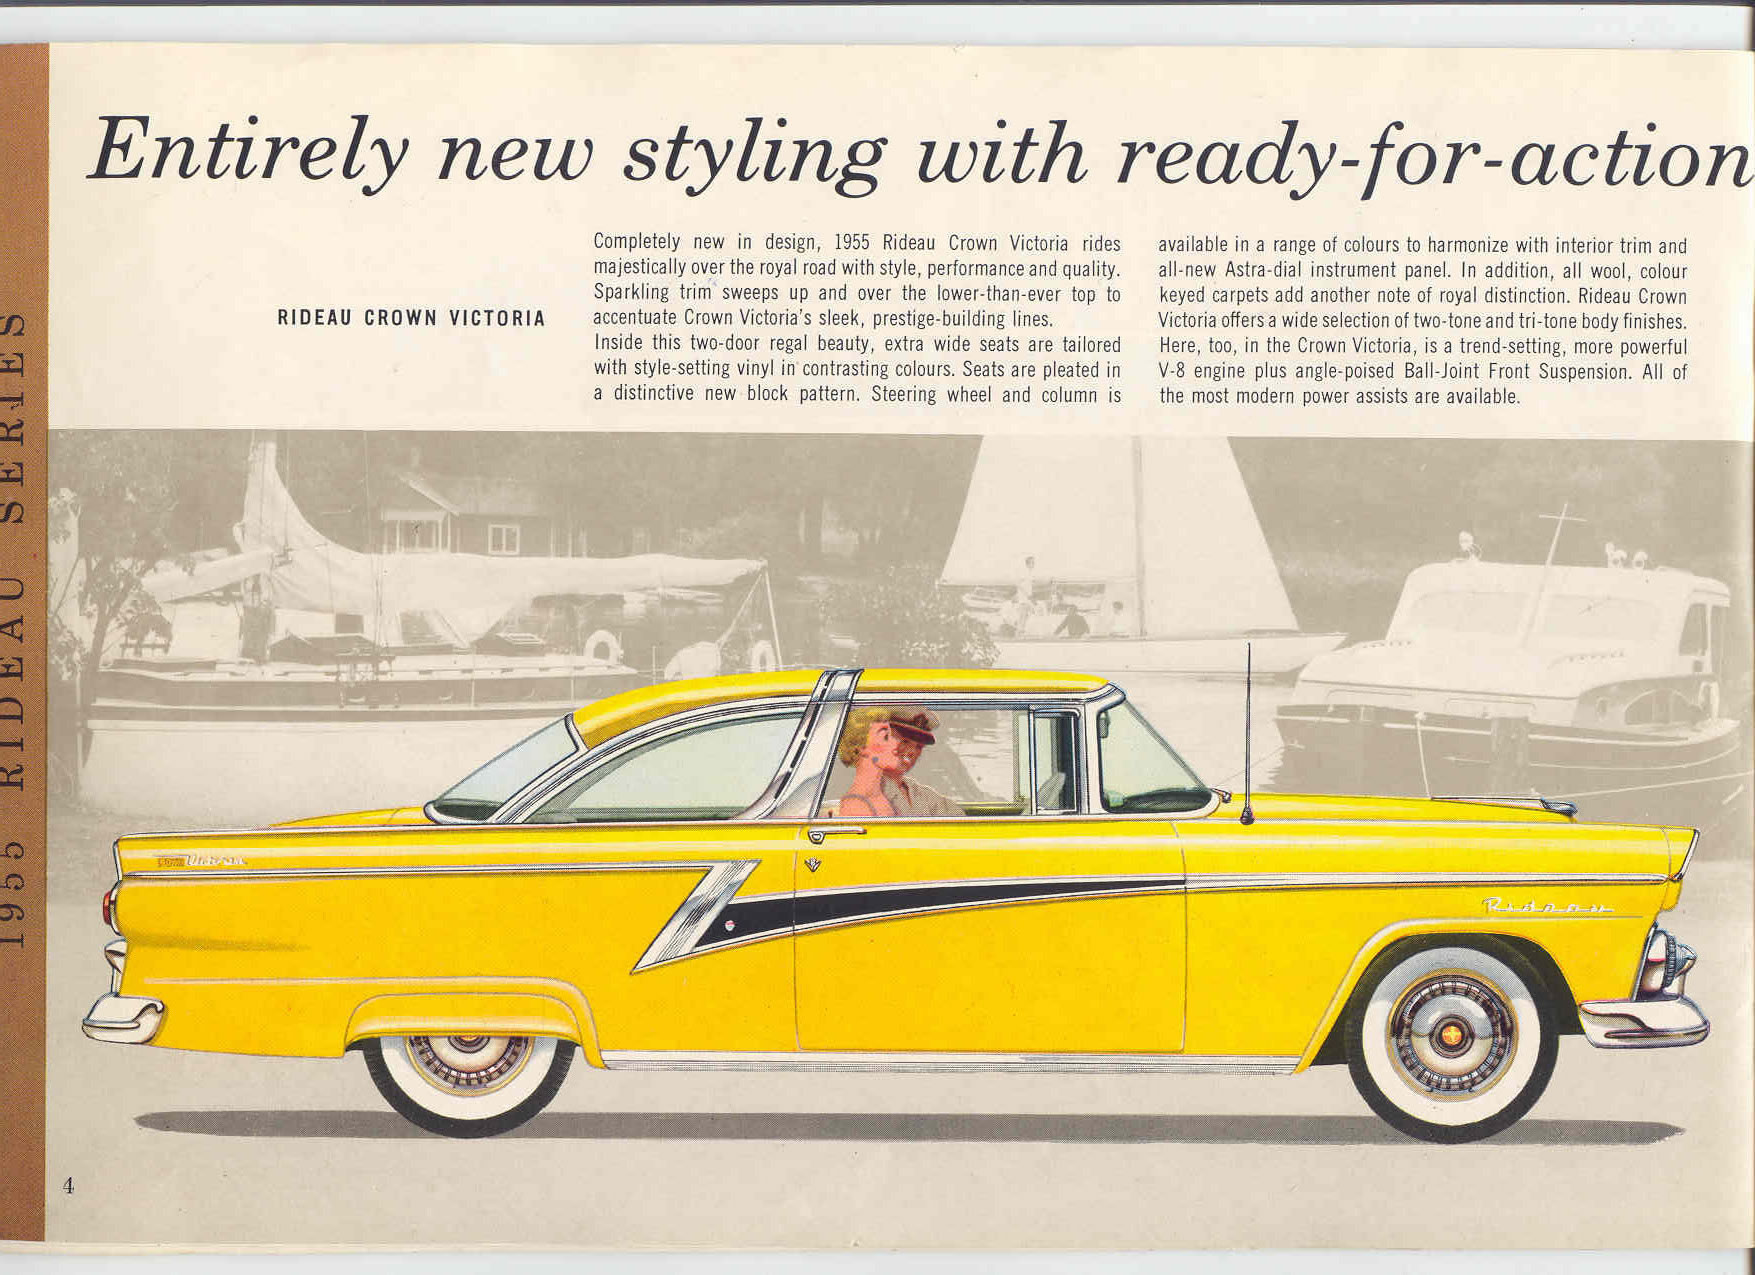 1955 FORD METEOR  AD  french 3 PAGES